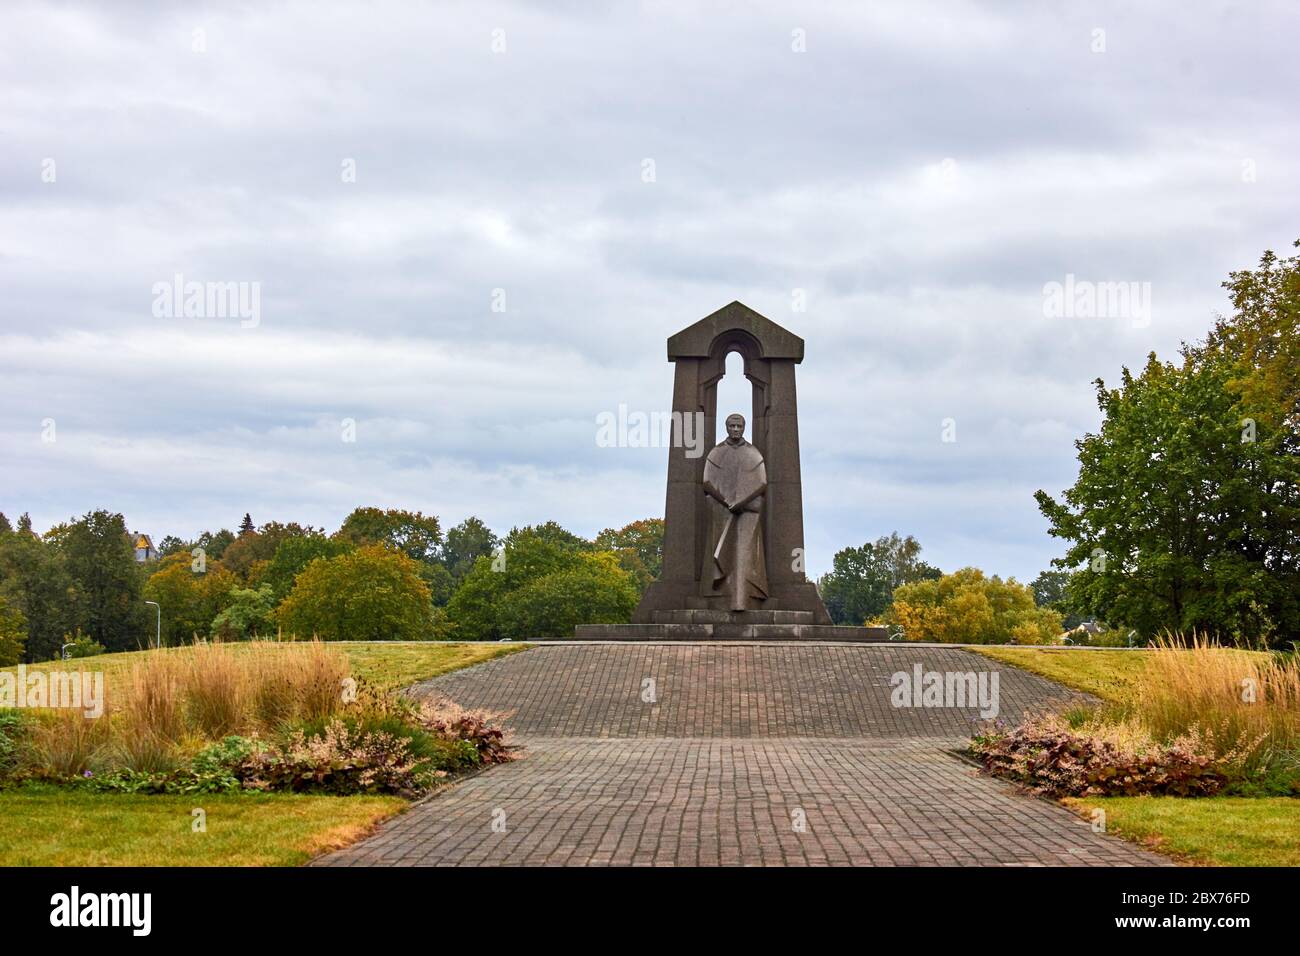 Monument to the famous person in Lithuania Stock Photo